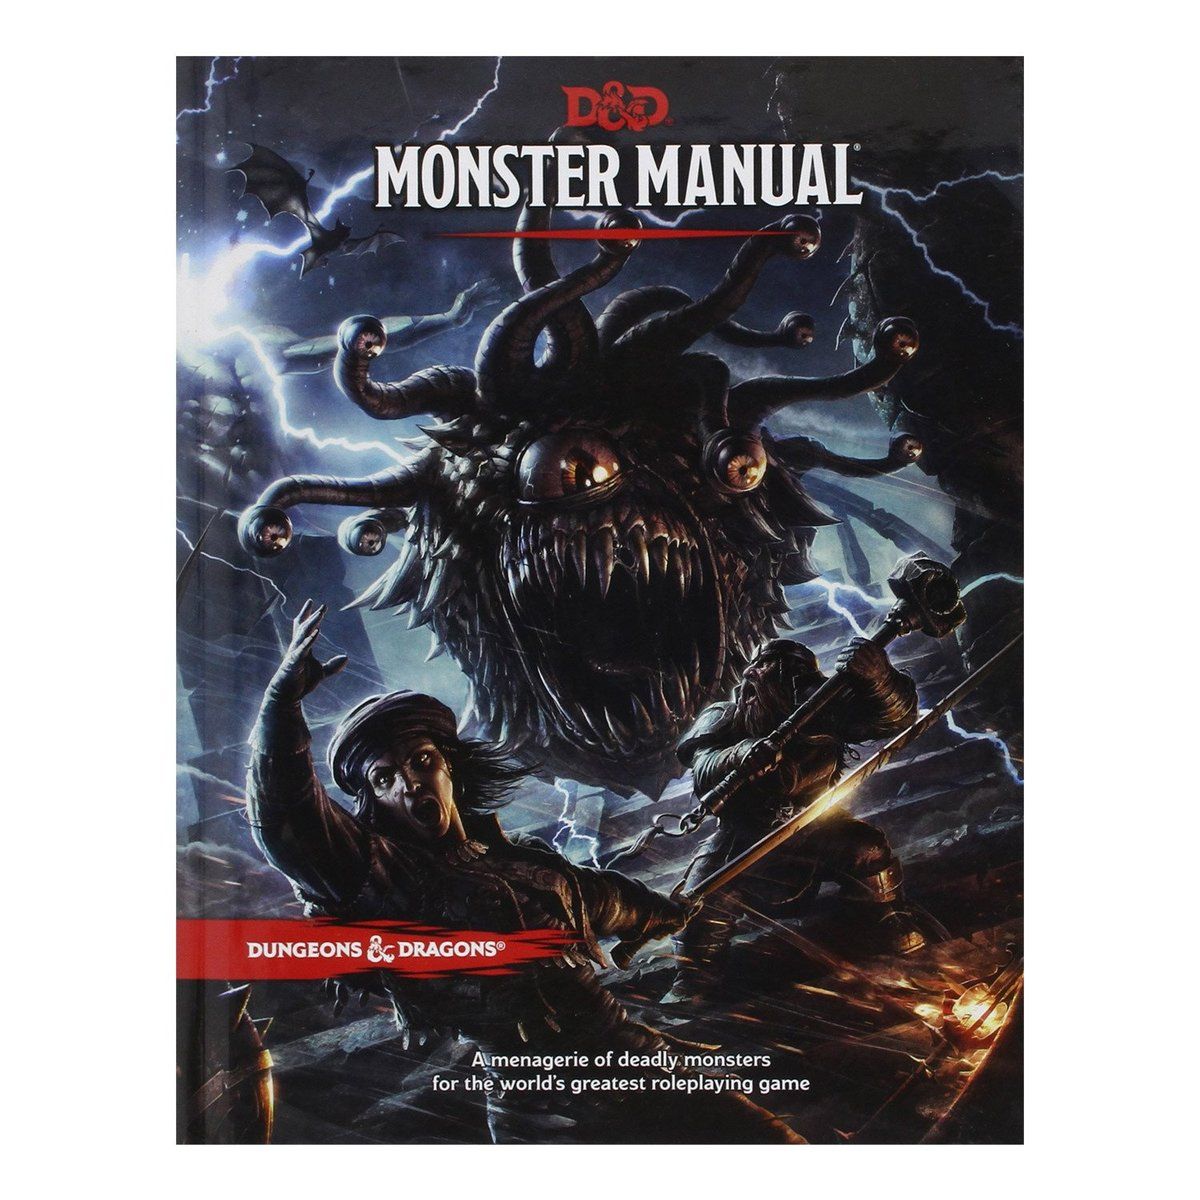 Dungeons & Dragons Monster Manual - Hardcover Wizards of the Coast DUNGEONS & DRAGONS